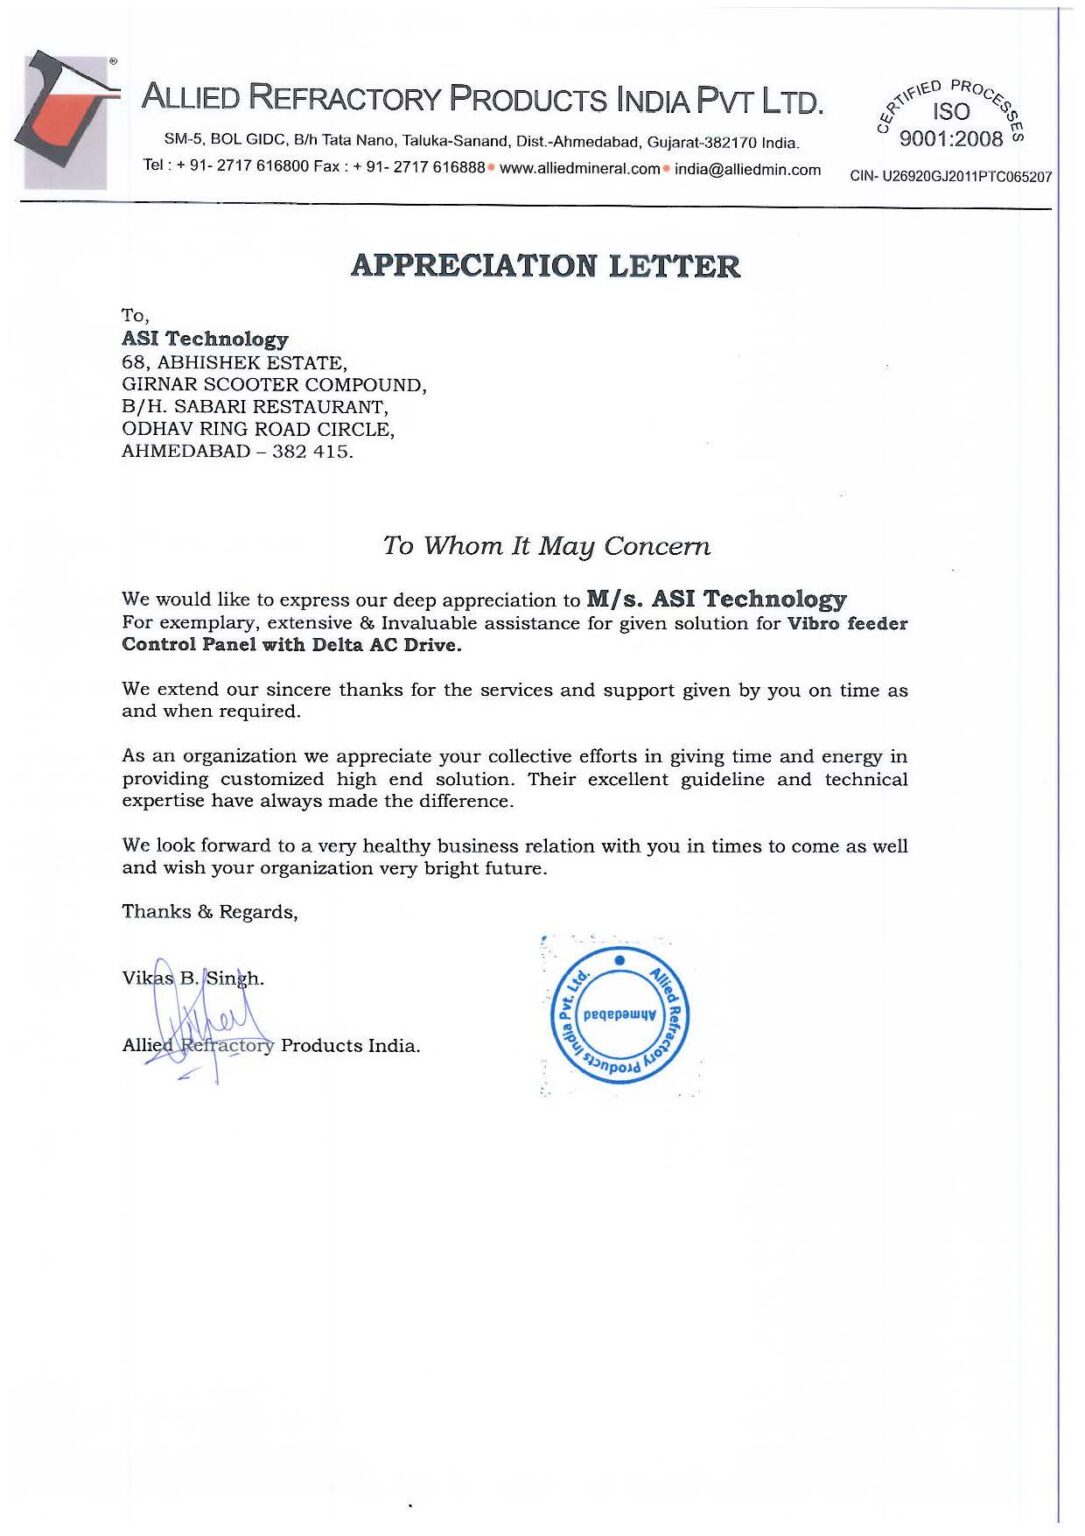 ALLIED REFRACTORY LETTER